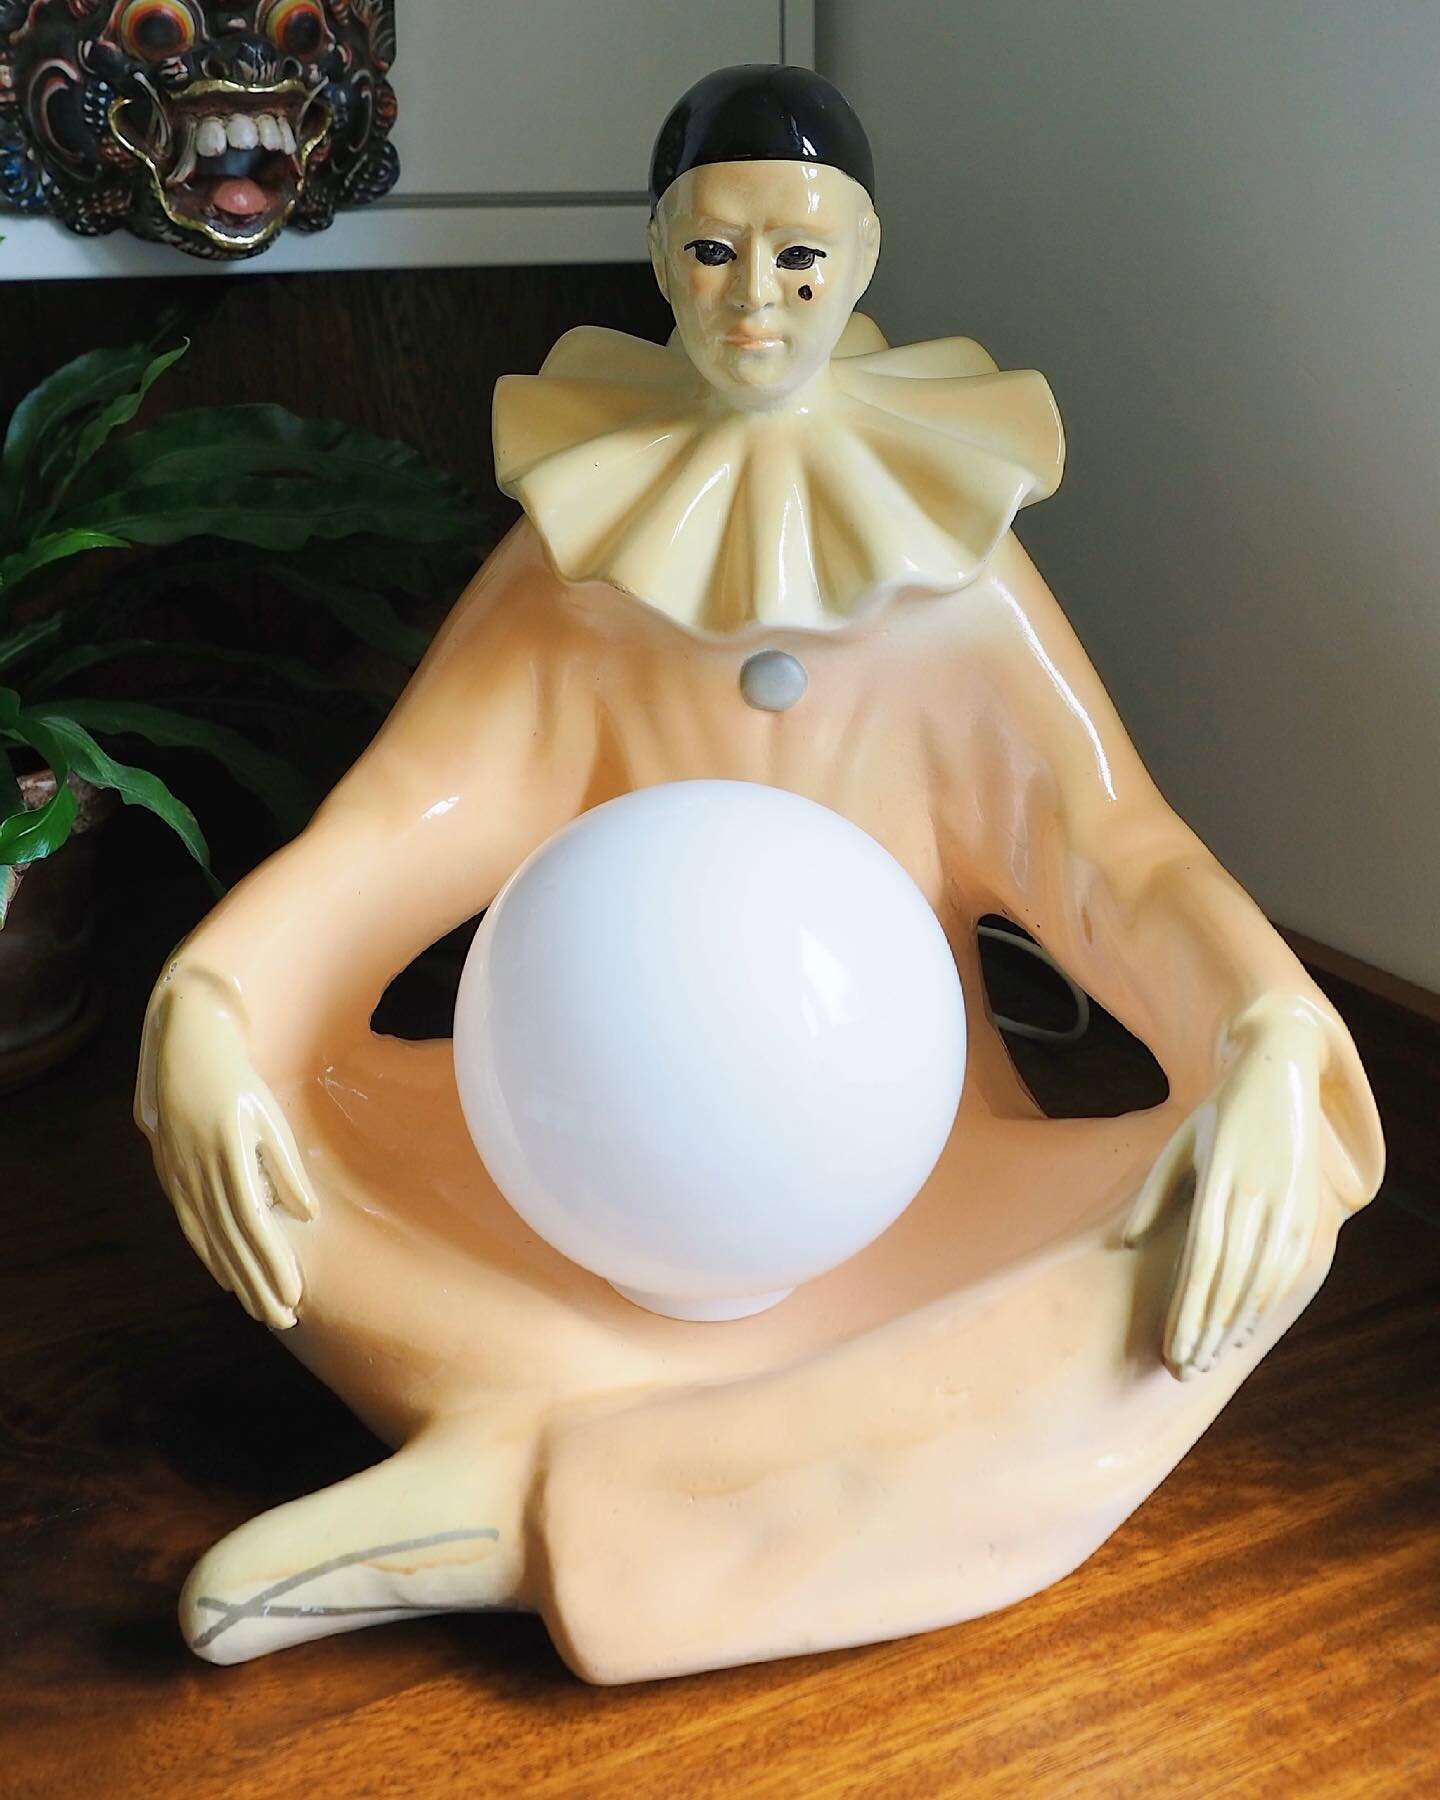 ✦ A clown held a door open for me the other day. I thought, &ldquo;what a nice jester&rdquo; 🥁✦ 

This unique 1950&rsquo;s peridot clown lamp has just been added to the website. It&rsquo;s in gorgeous peach and cream tones and would look amazing in 